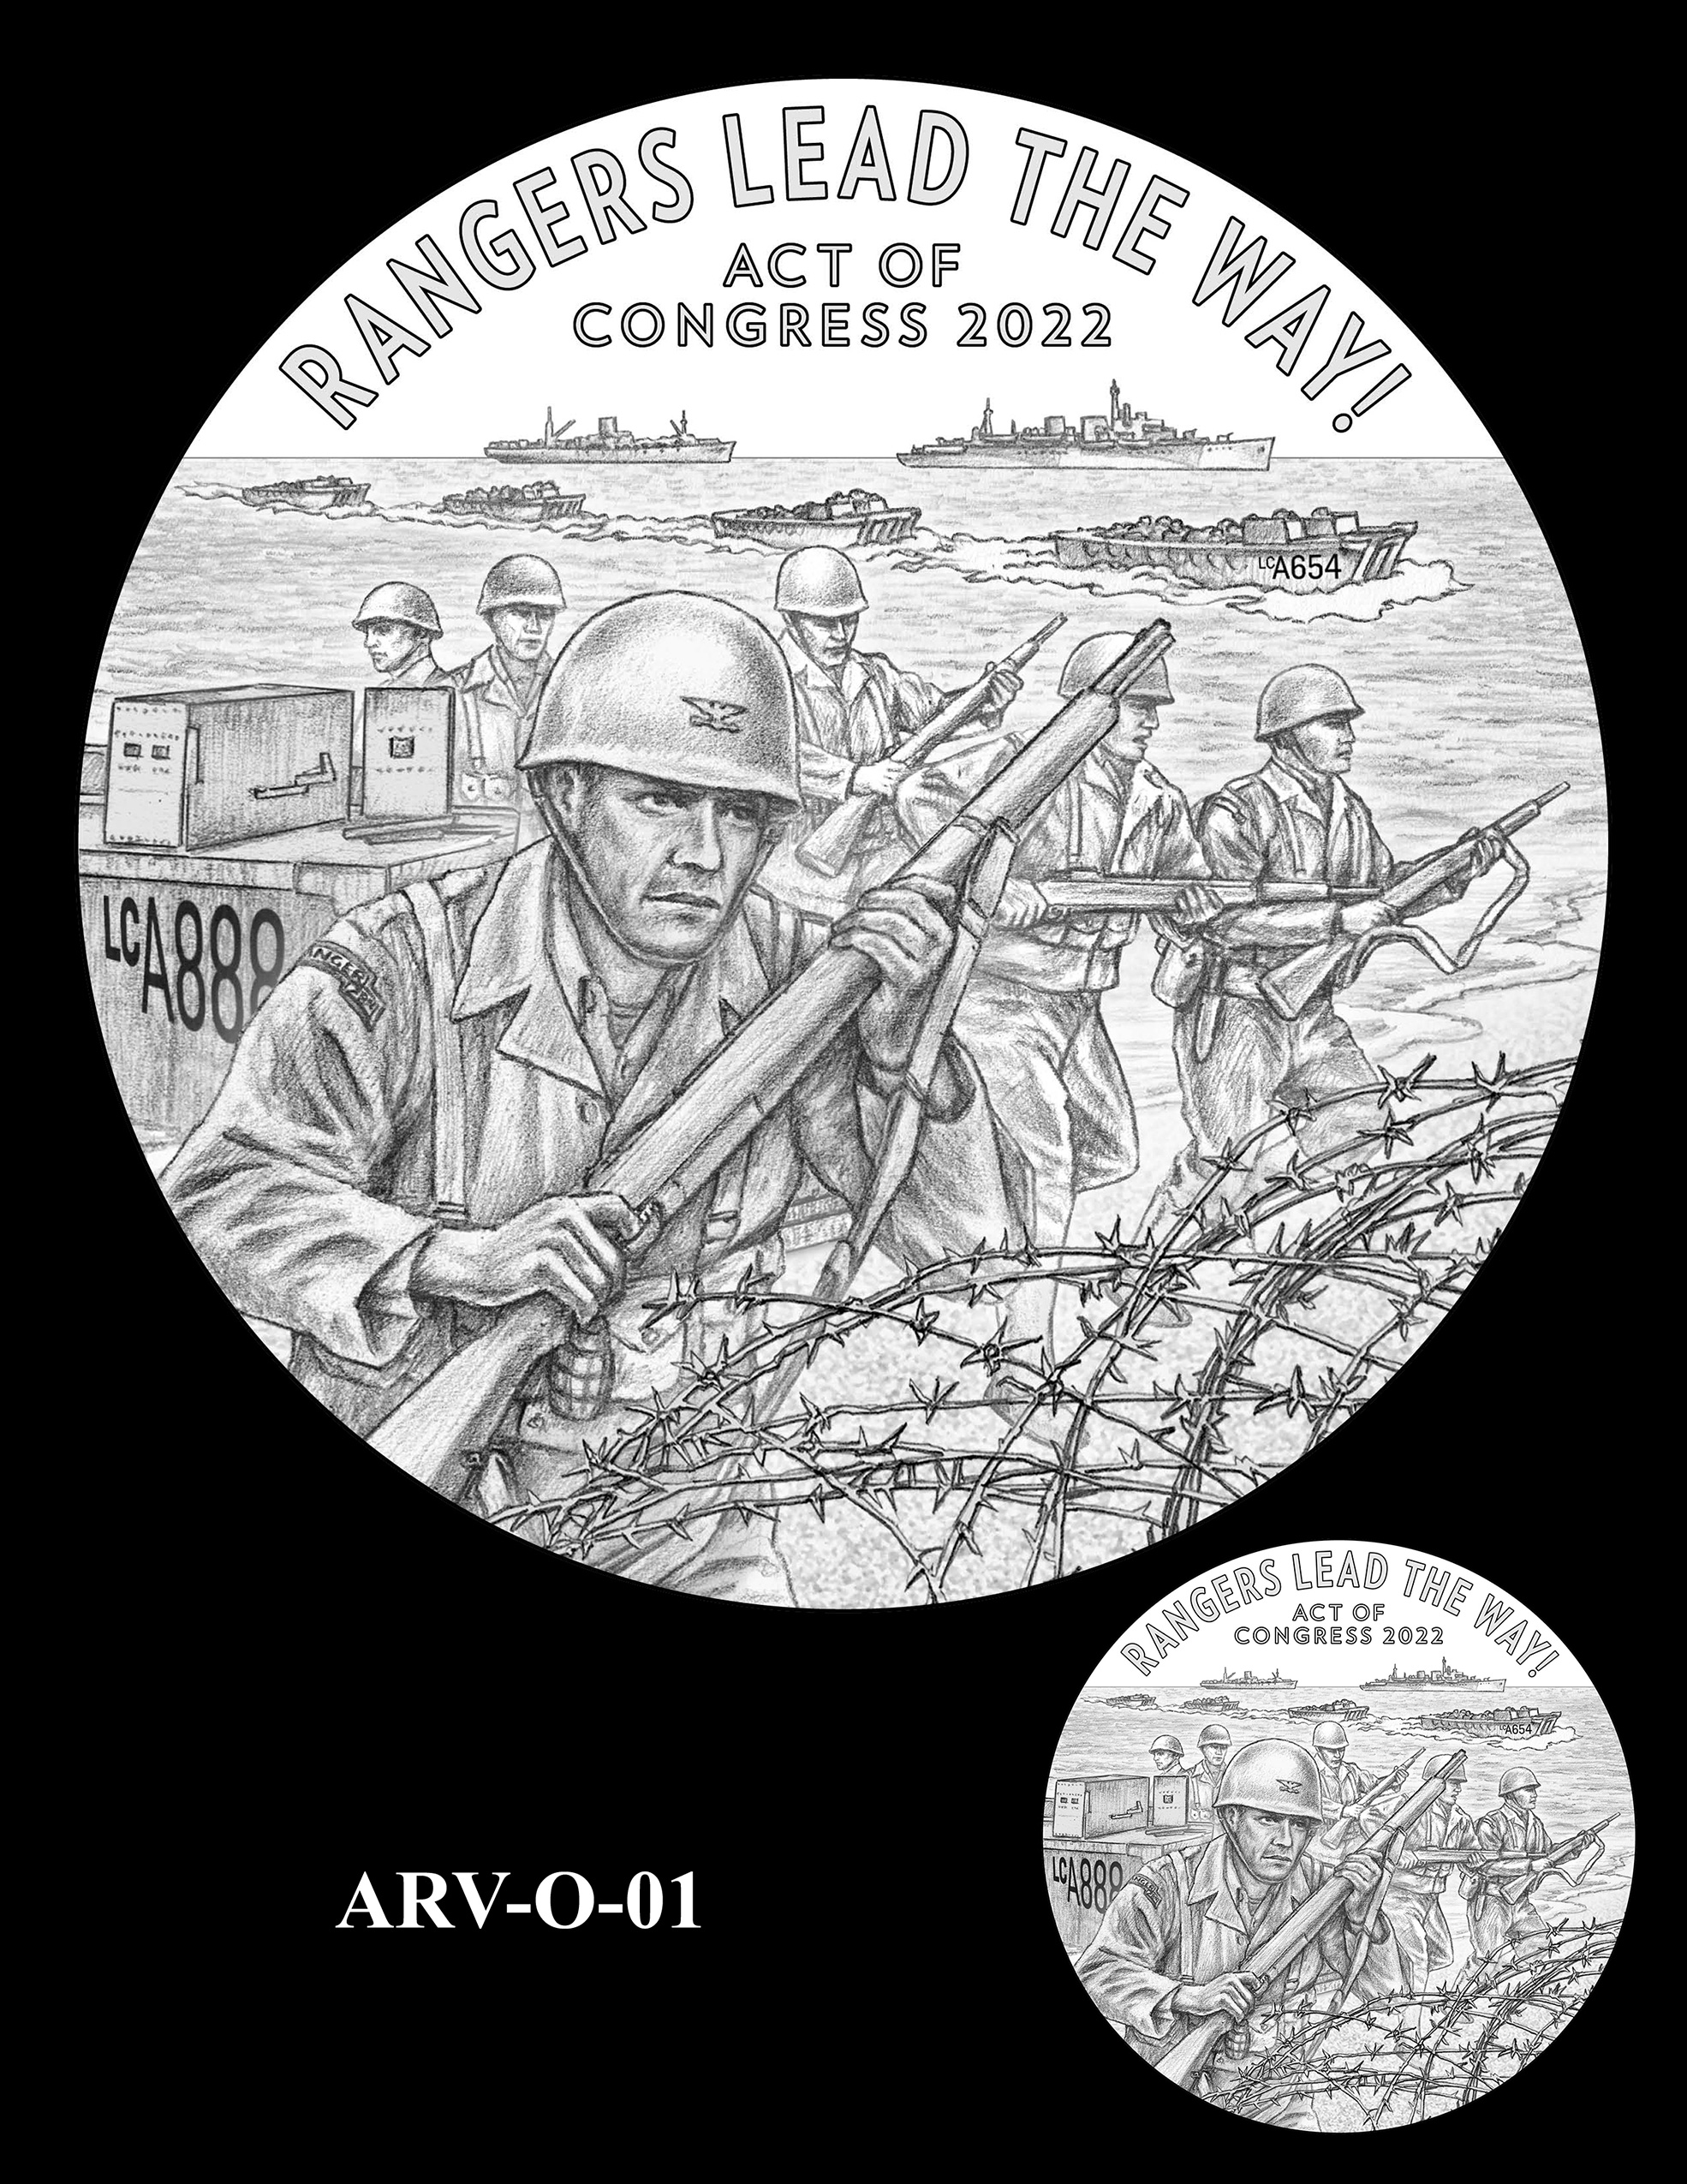 ARV-O-01 -- Army Ranger Veterans of WWII Congressional Gold Medal